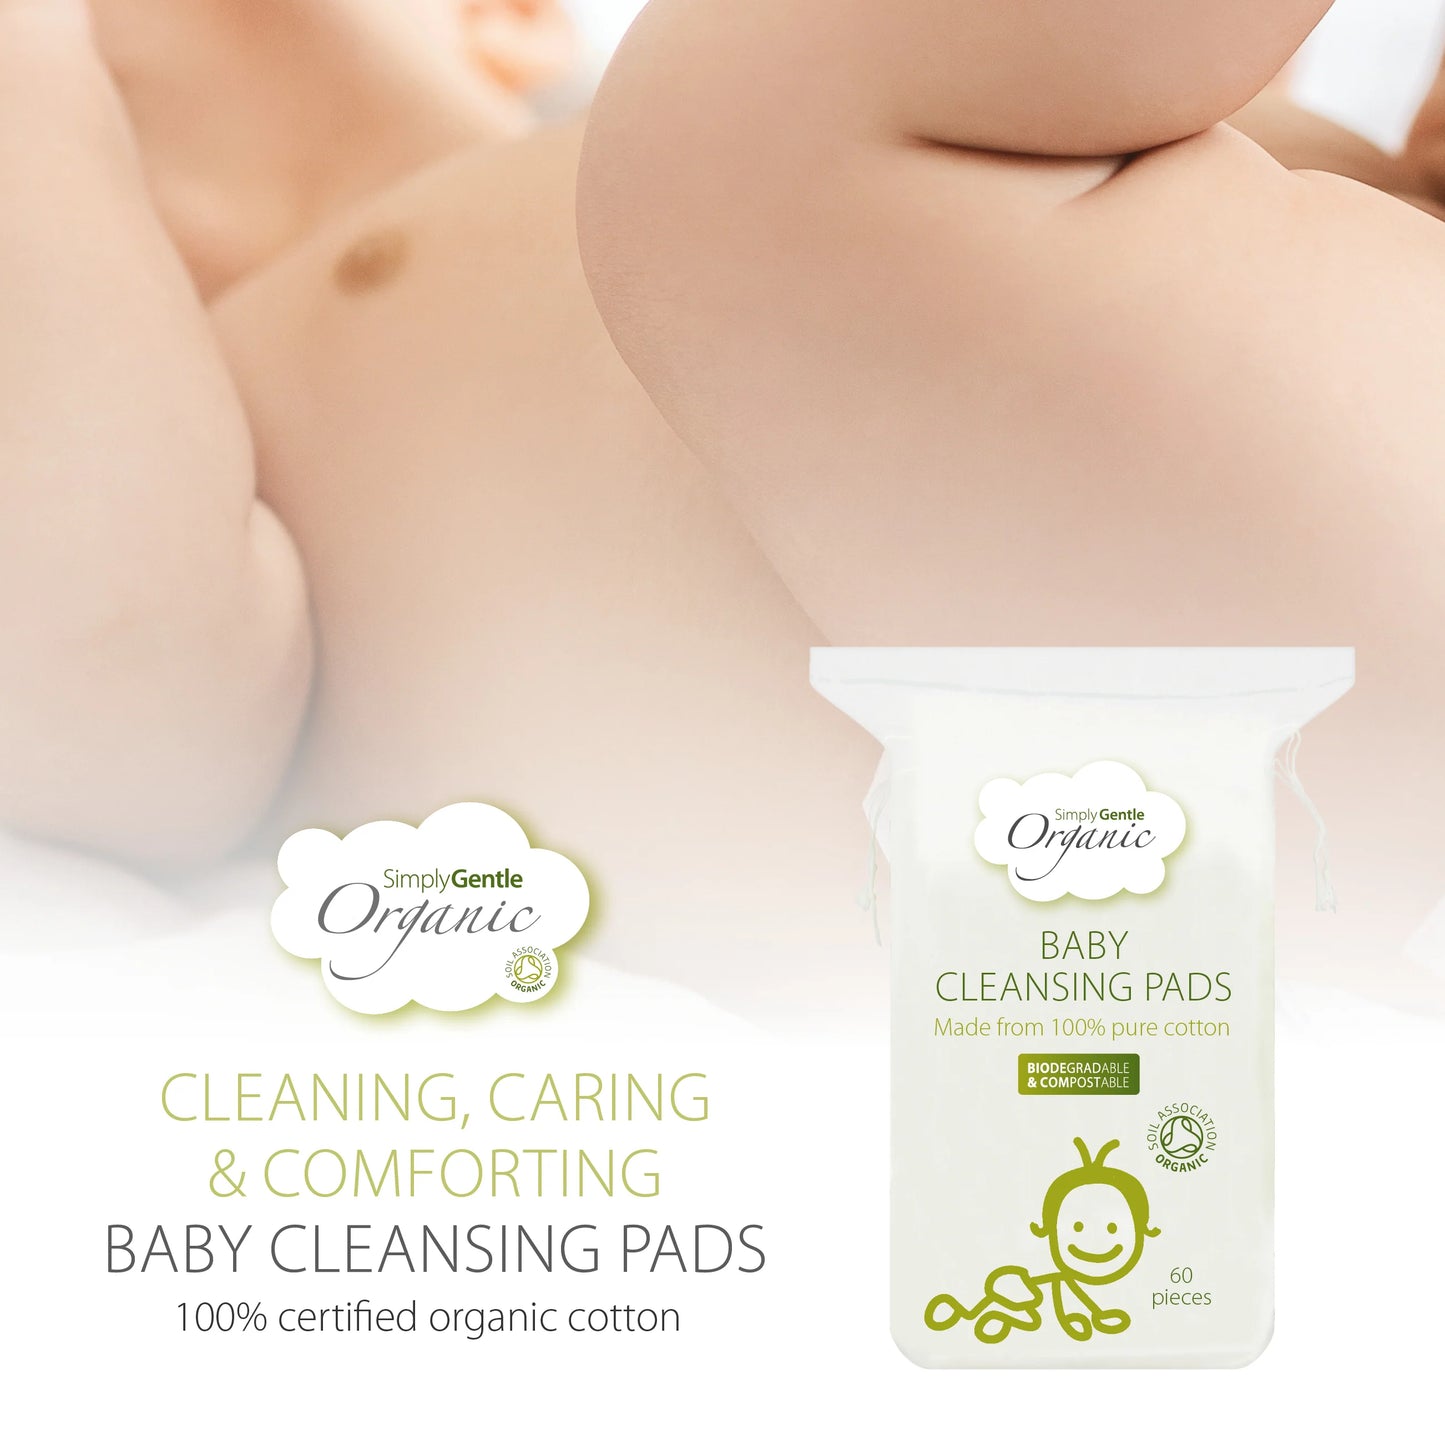 Simply Gentle Organic Baby Cotton Cleansing Pads 60 Pk, Cleaning Caring & Comforting